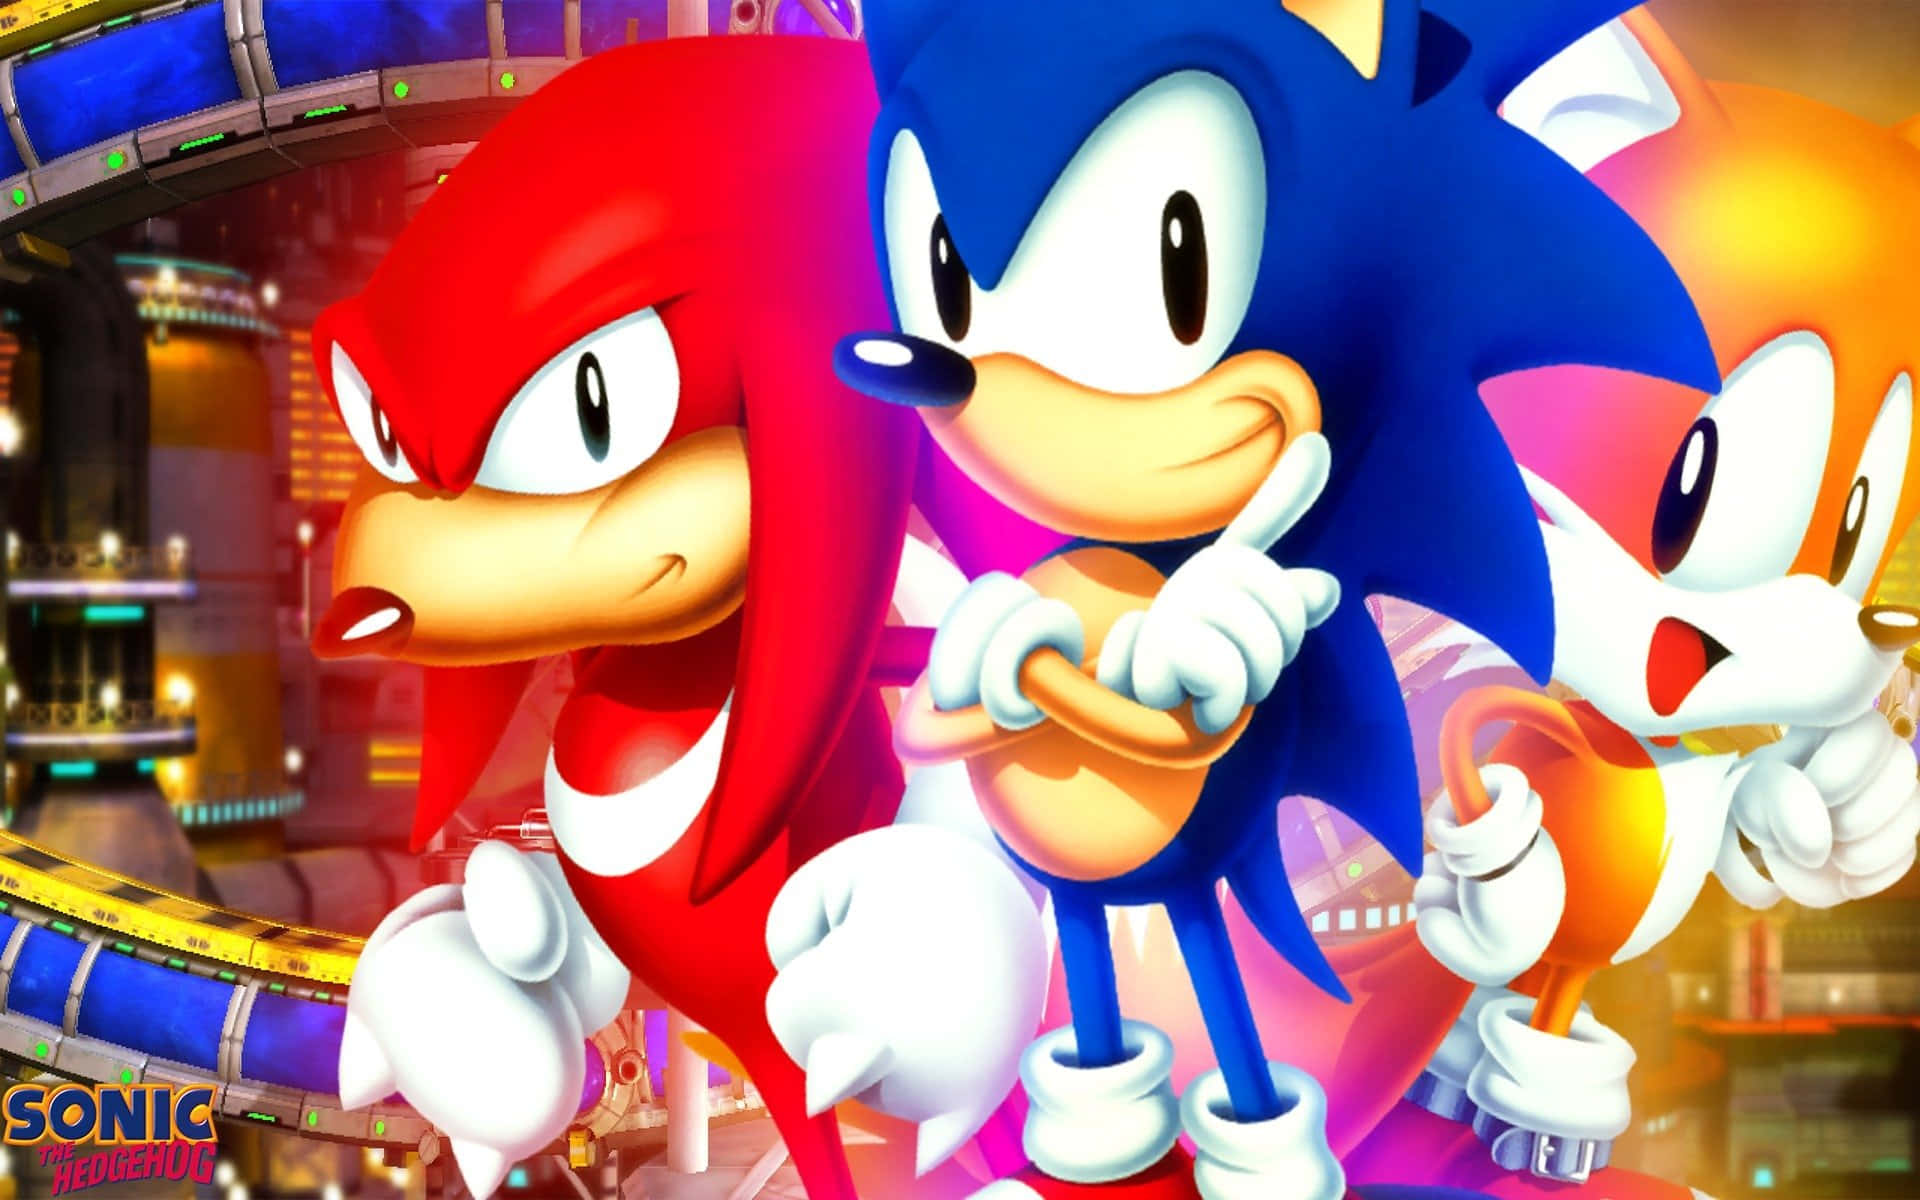 Sonic and Knuckles facing adventure together Wallpaper